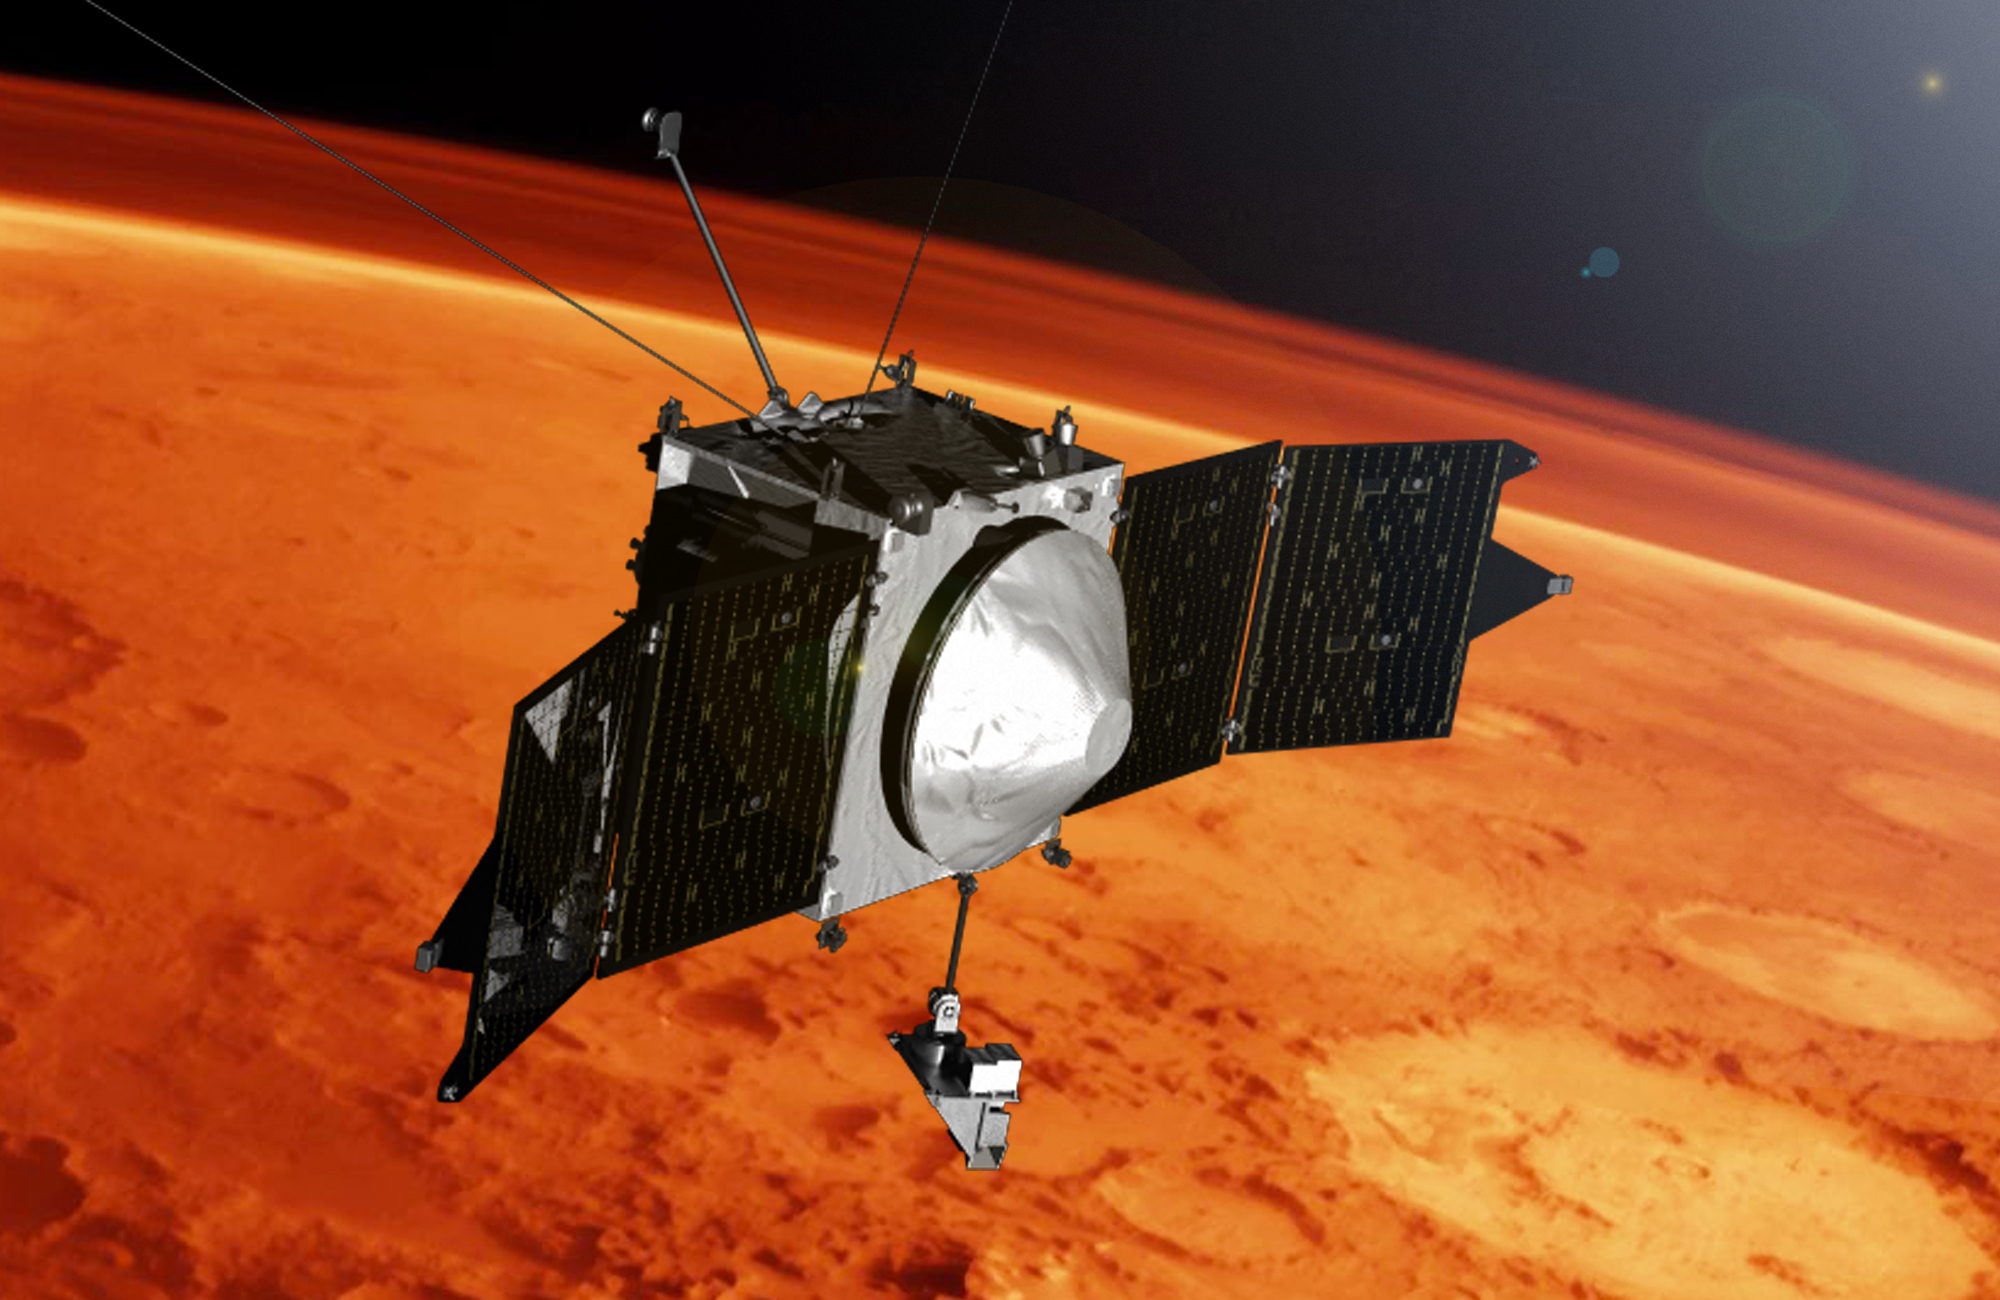 NASA's MAVEN mission is observing the upper atmosphere of Mars to help understand climate change on the planet. MAVEN entered its science phase on Nov. 16, 2014.